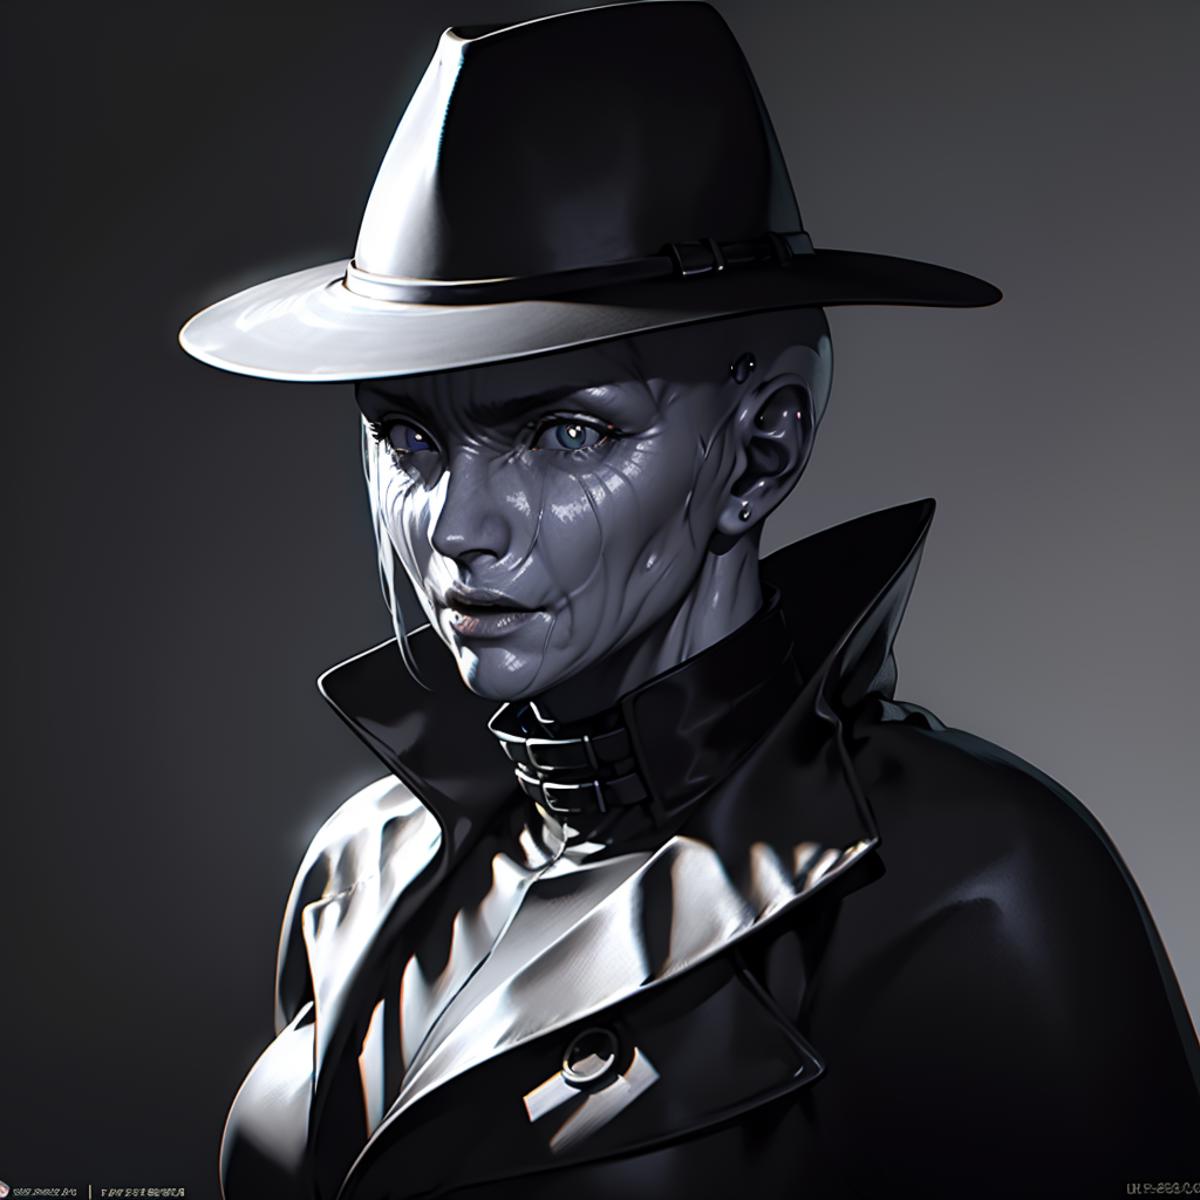 AI model image by infamous__fish